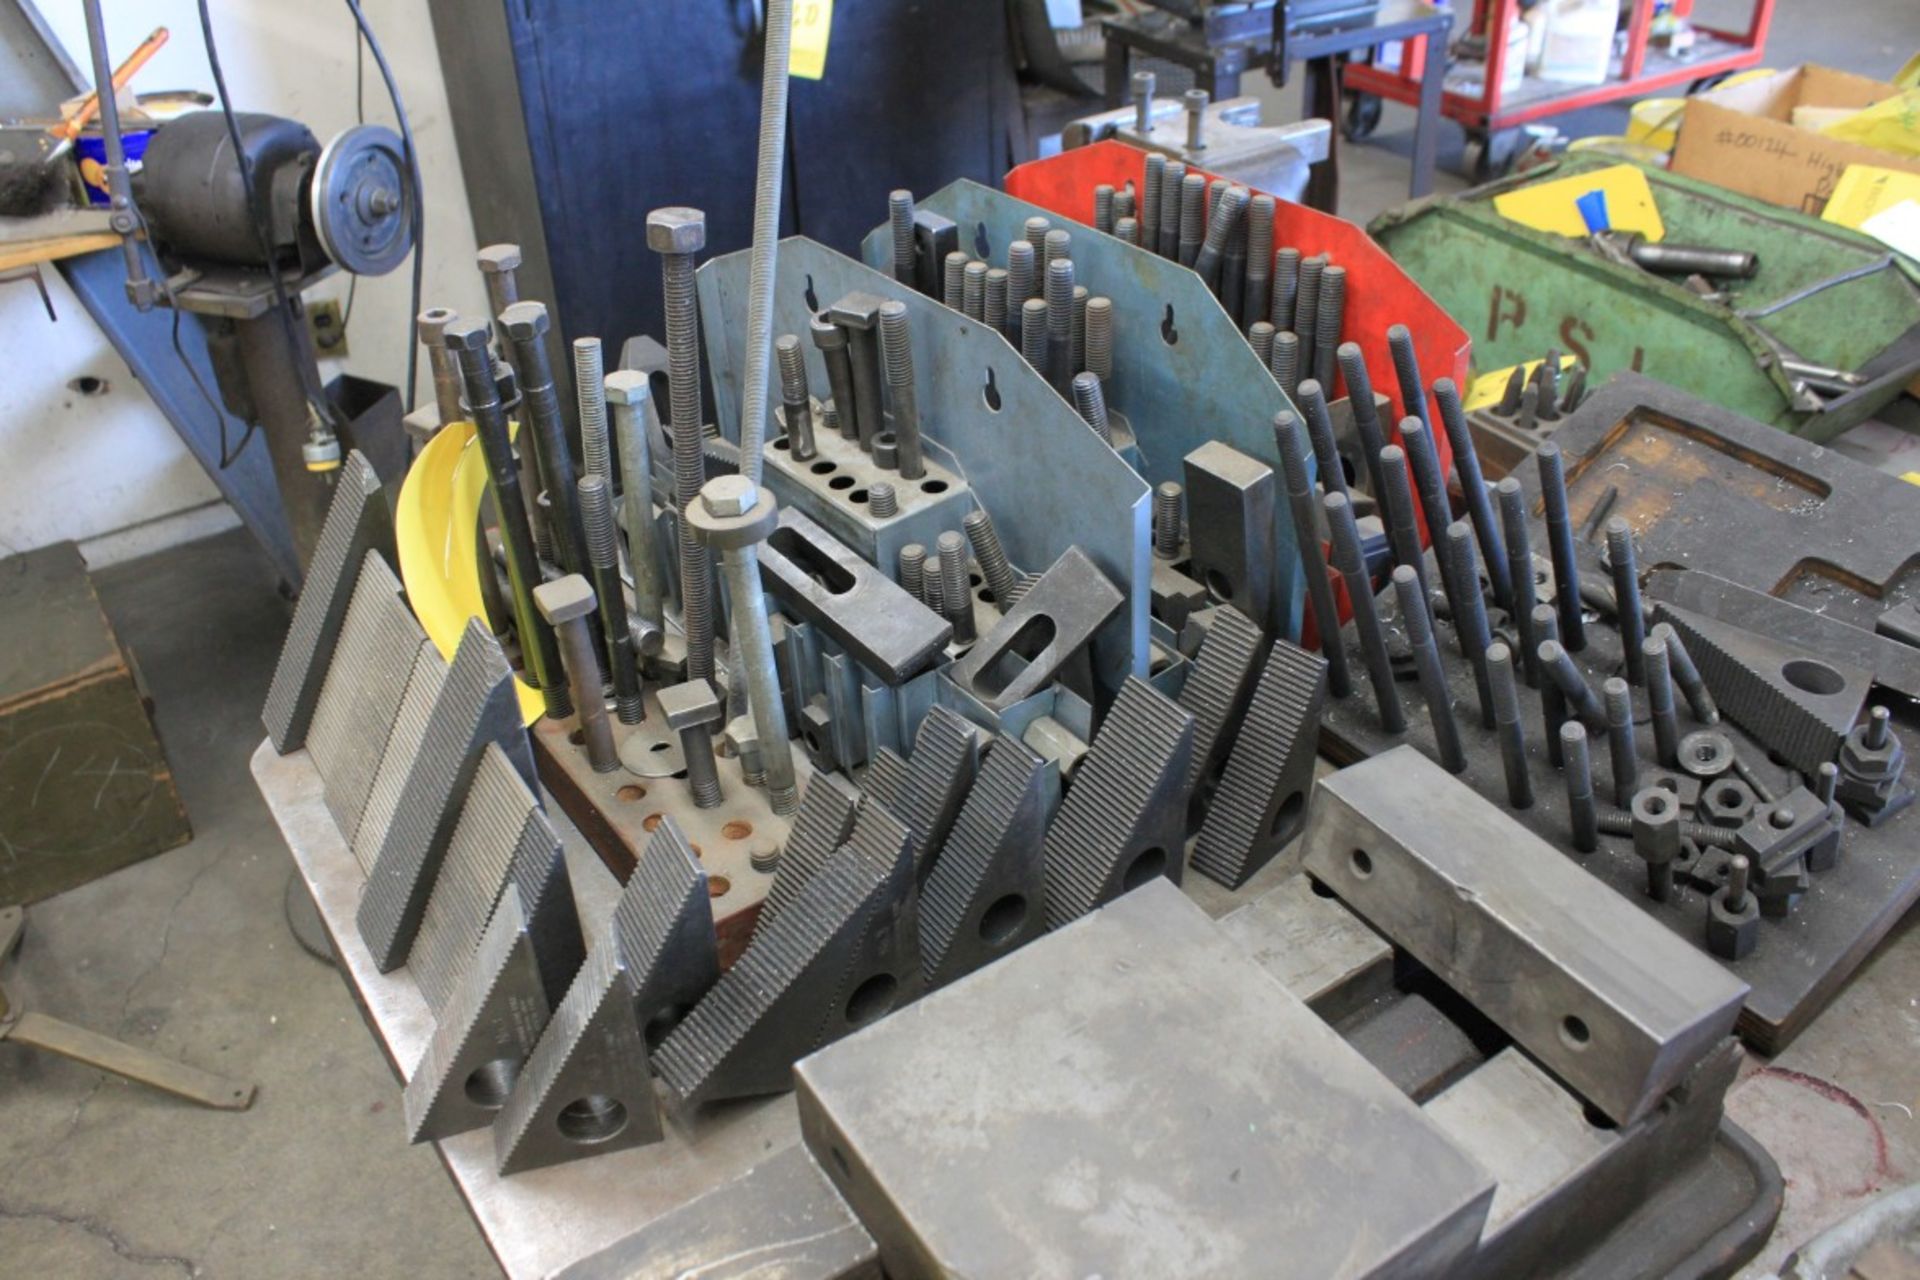 Clamping Sets for Milling Machines (Located at 13938 Fox Street, San Fernando, CA) - Image 2 of 2